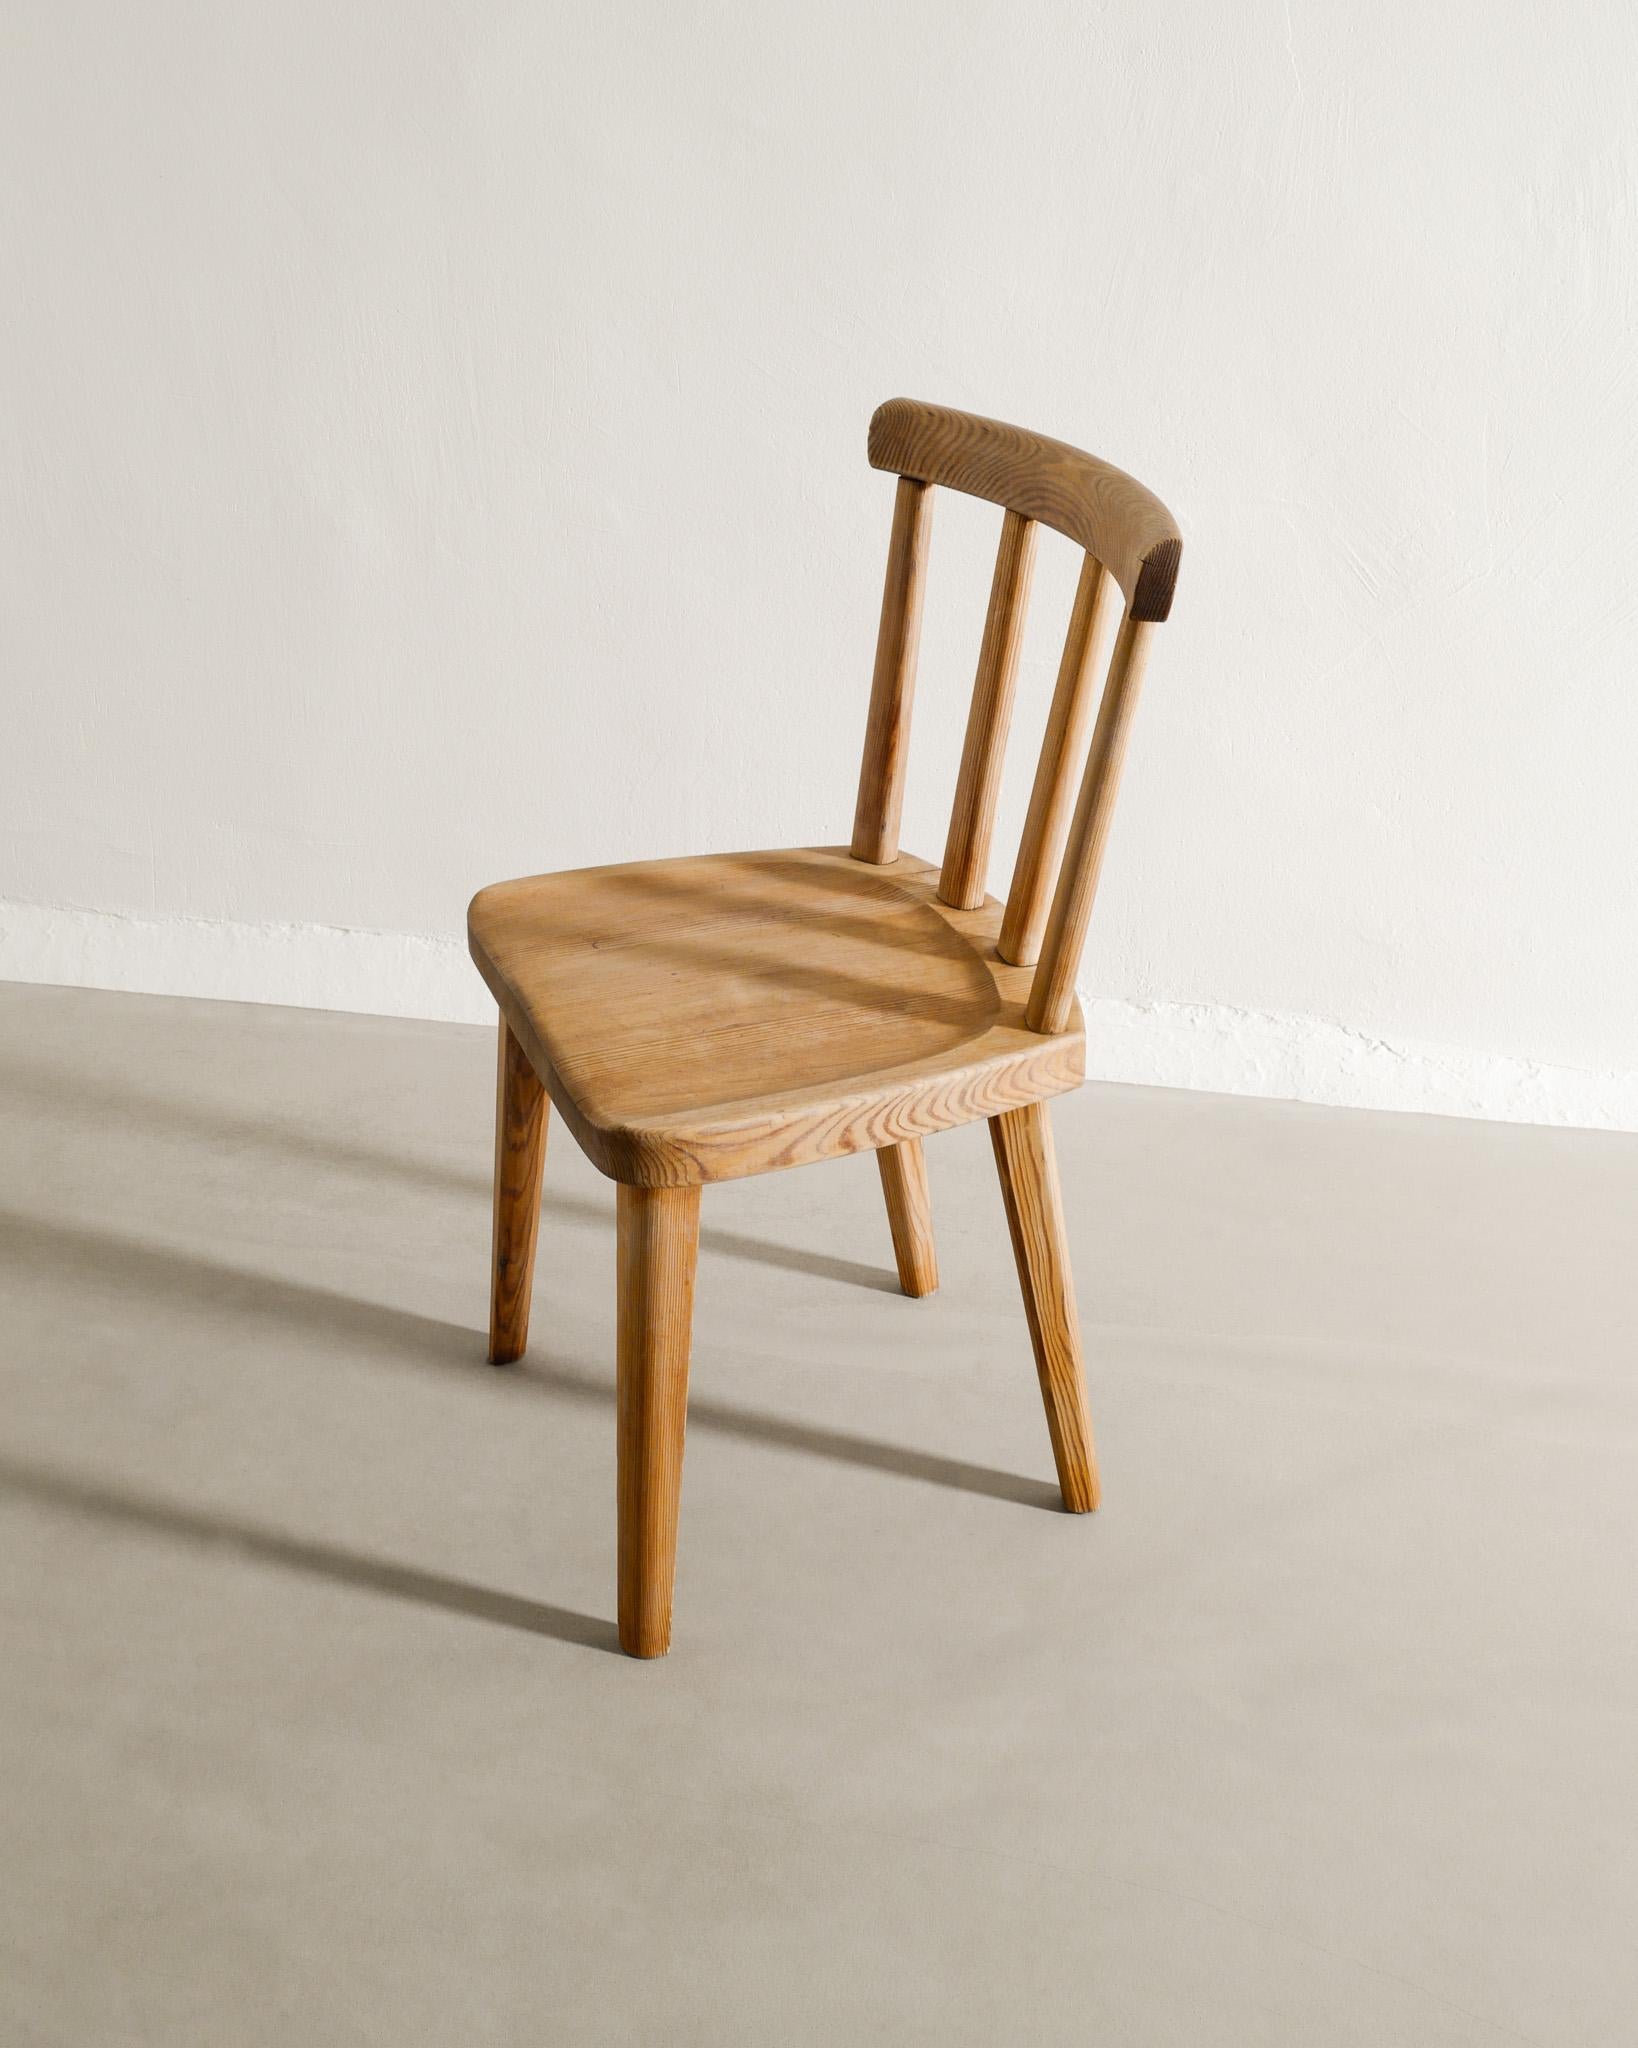 Single Wooden Dining Utö Chair in Pine by Axel Einar Hjorth for NK Sweden, 1932 In Good Condition For Sale In Stockholm, SE